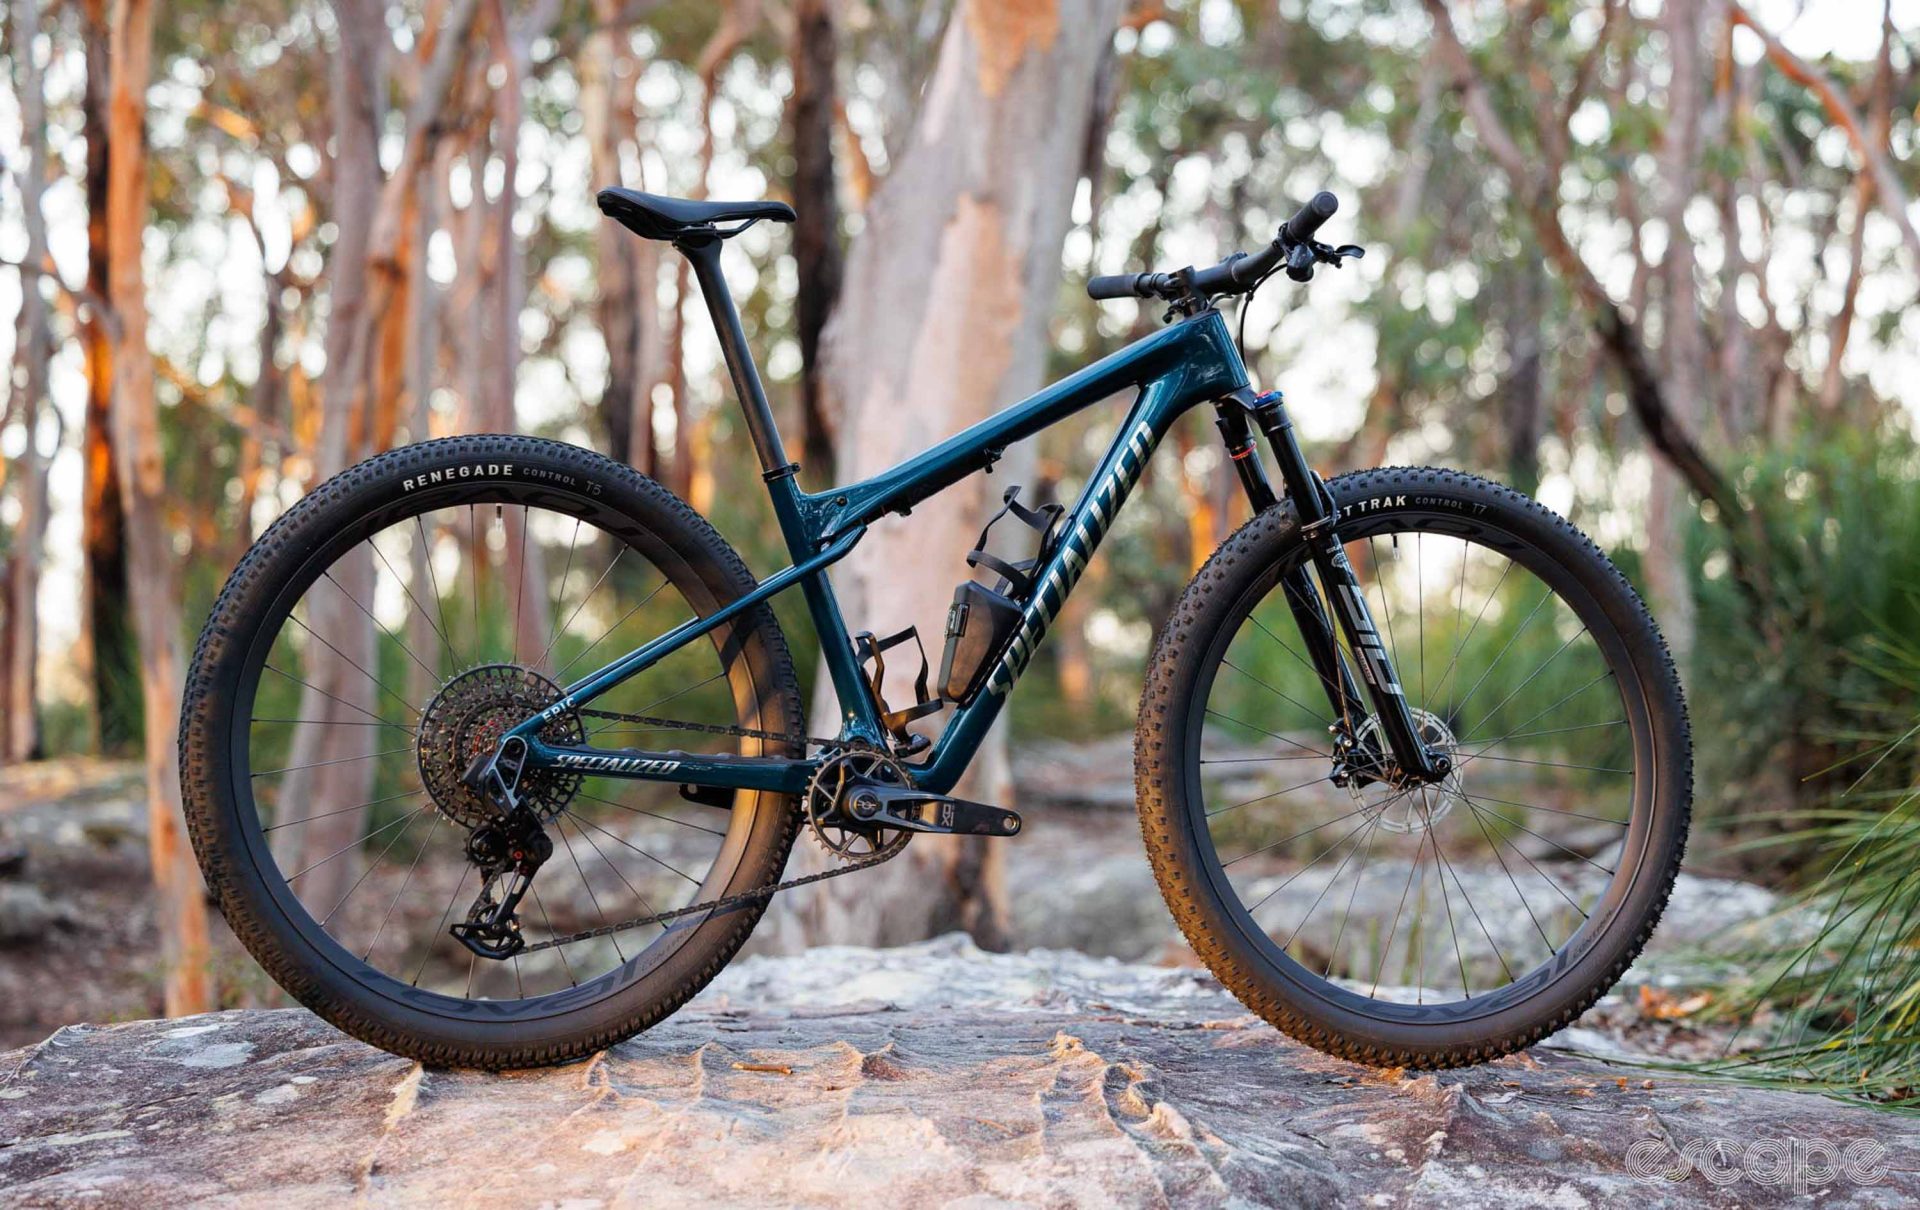 The Specialized Epic World Cup is a Supercaliber competitor and looks very similar, with a single-pivot suspension, rear shock tucked under the top tube, and similar travel This green Epic could easily be mistaken for a Supercaliber at first glance except for the large silver Specialized logo on the downtube.